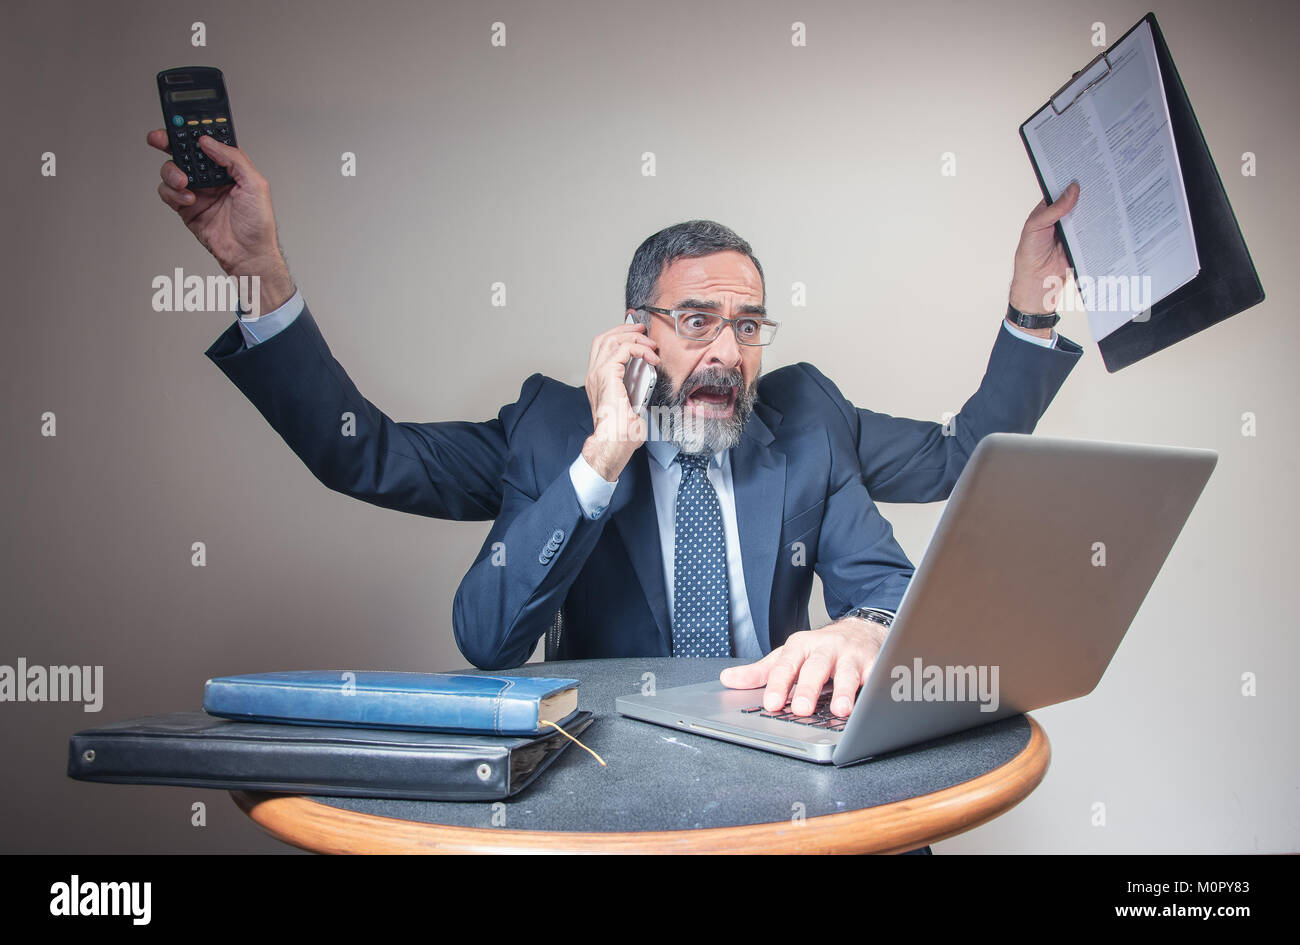 Pressured businessman multitasking, business concept and urban lifestyle Stock Photo